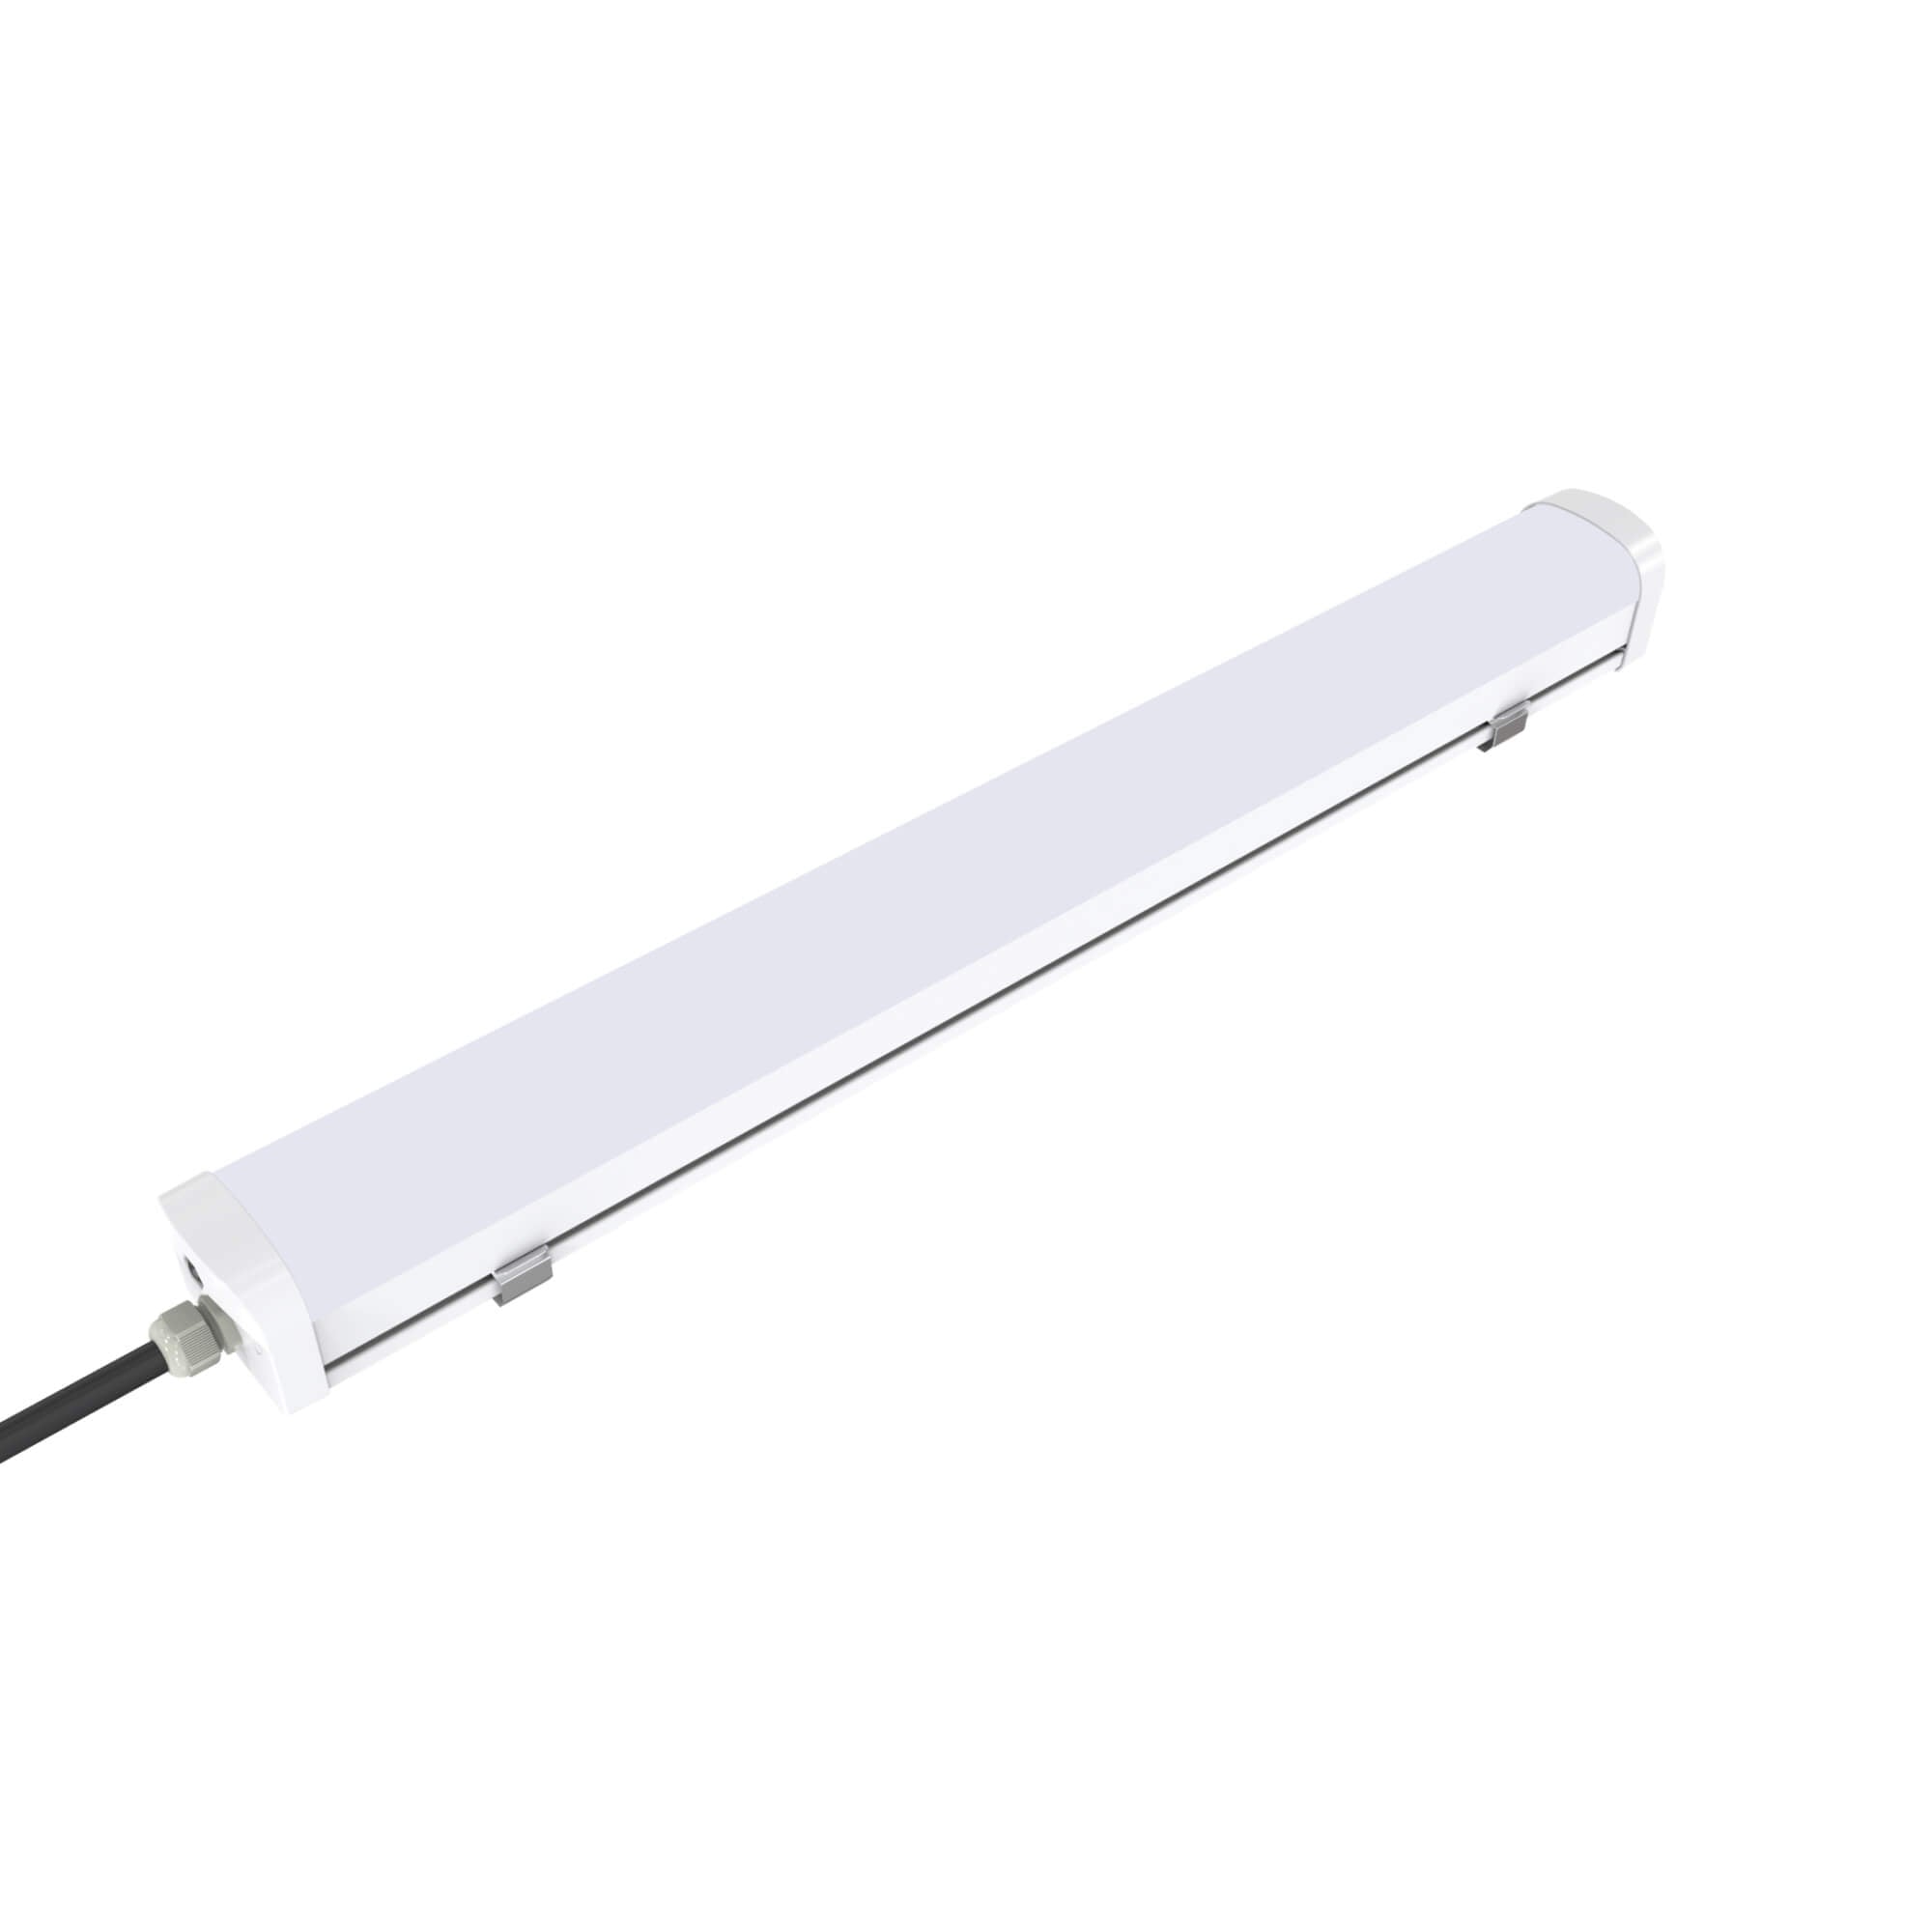 Halcon Lighting's Vapor Tight LED Light fixture, IP65 rated for wet and severe conditions, suitable for industrial locations and food processing plants